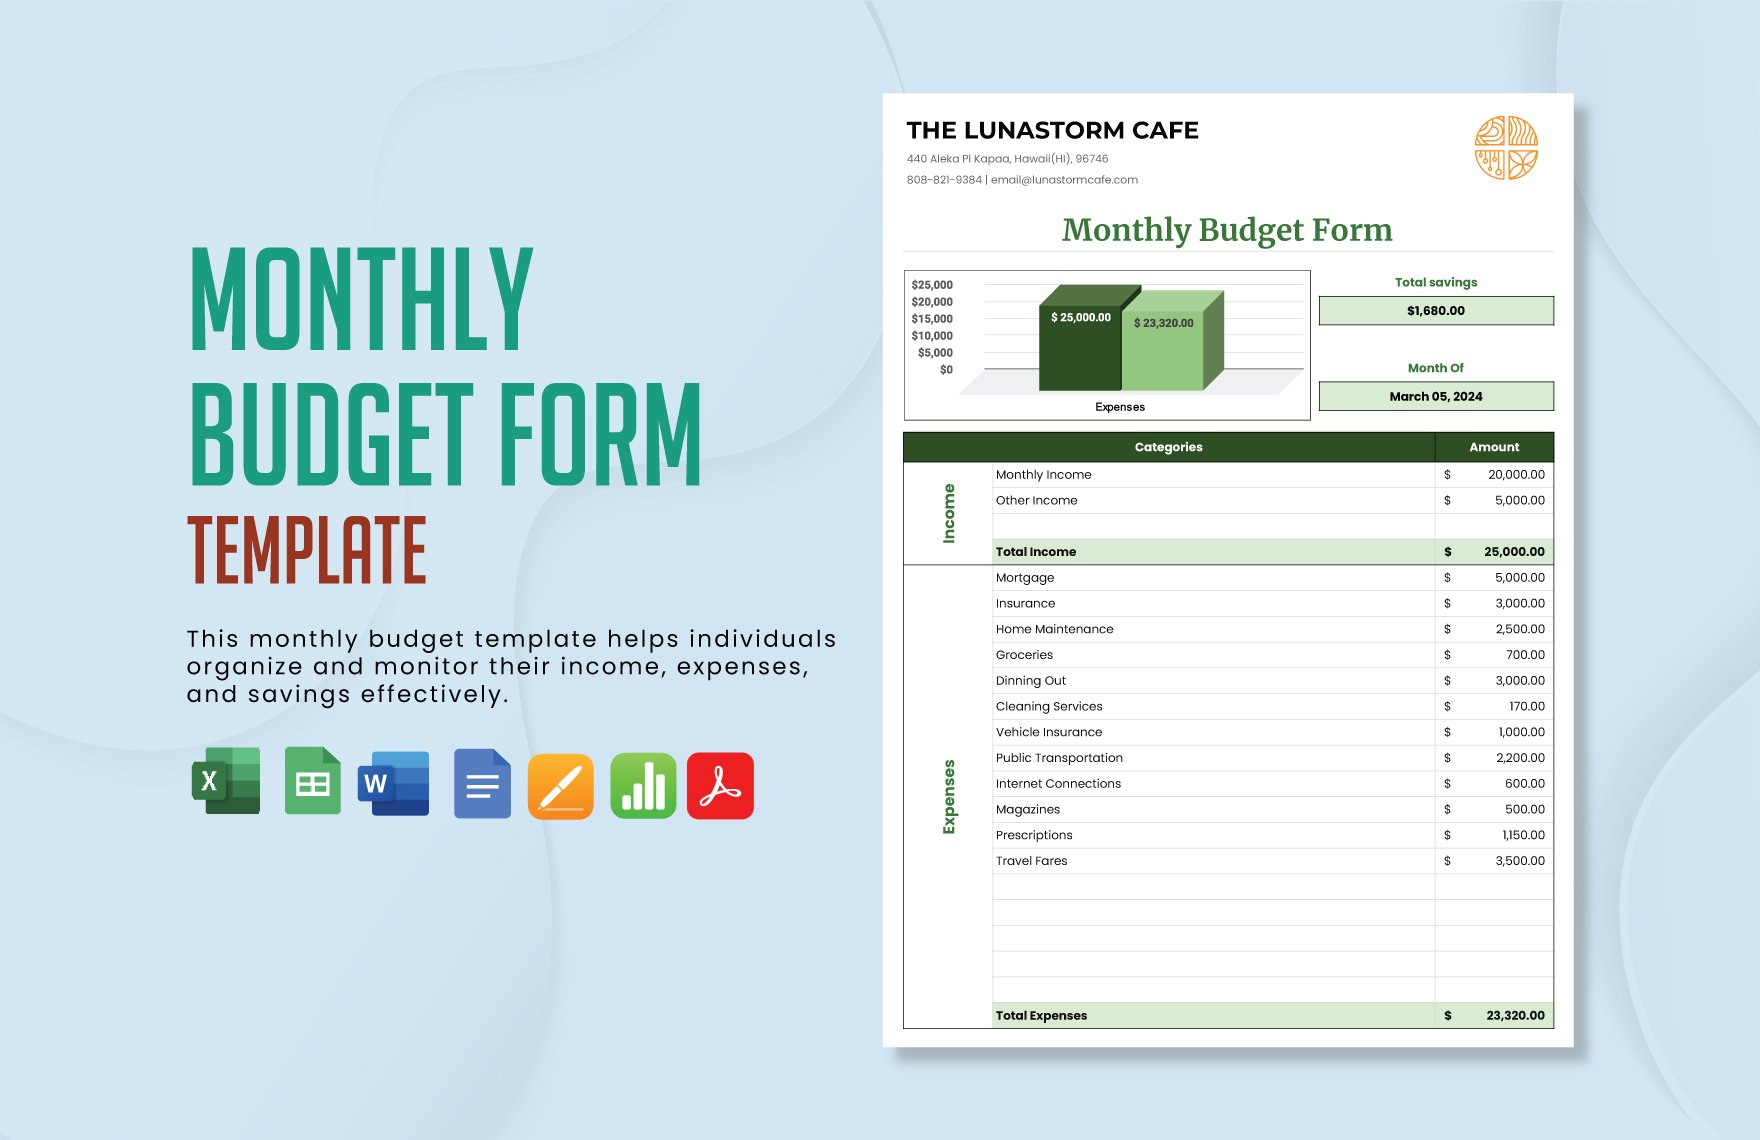 Monthly Budget Form Template